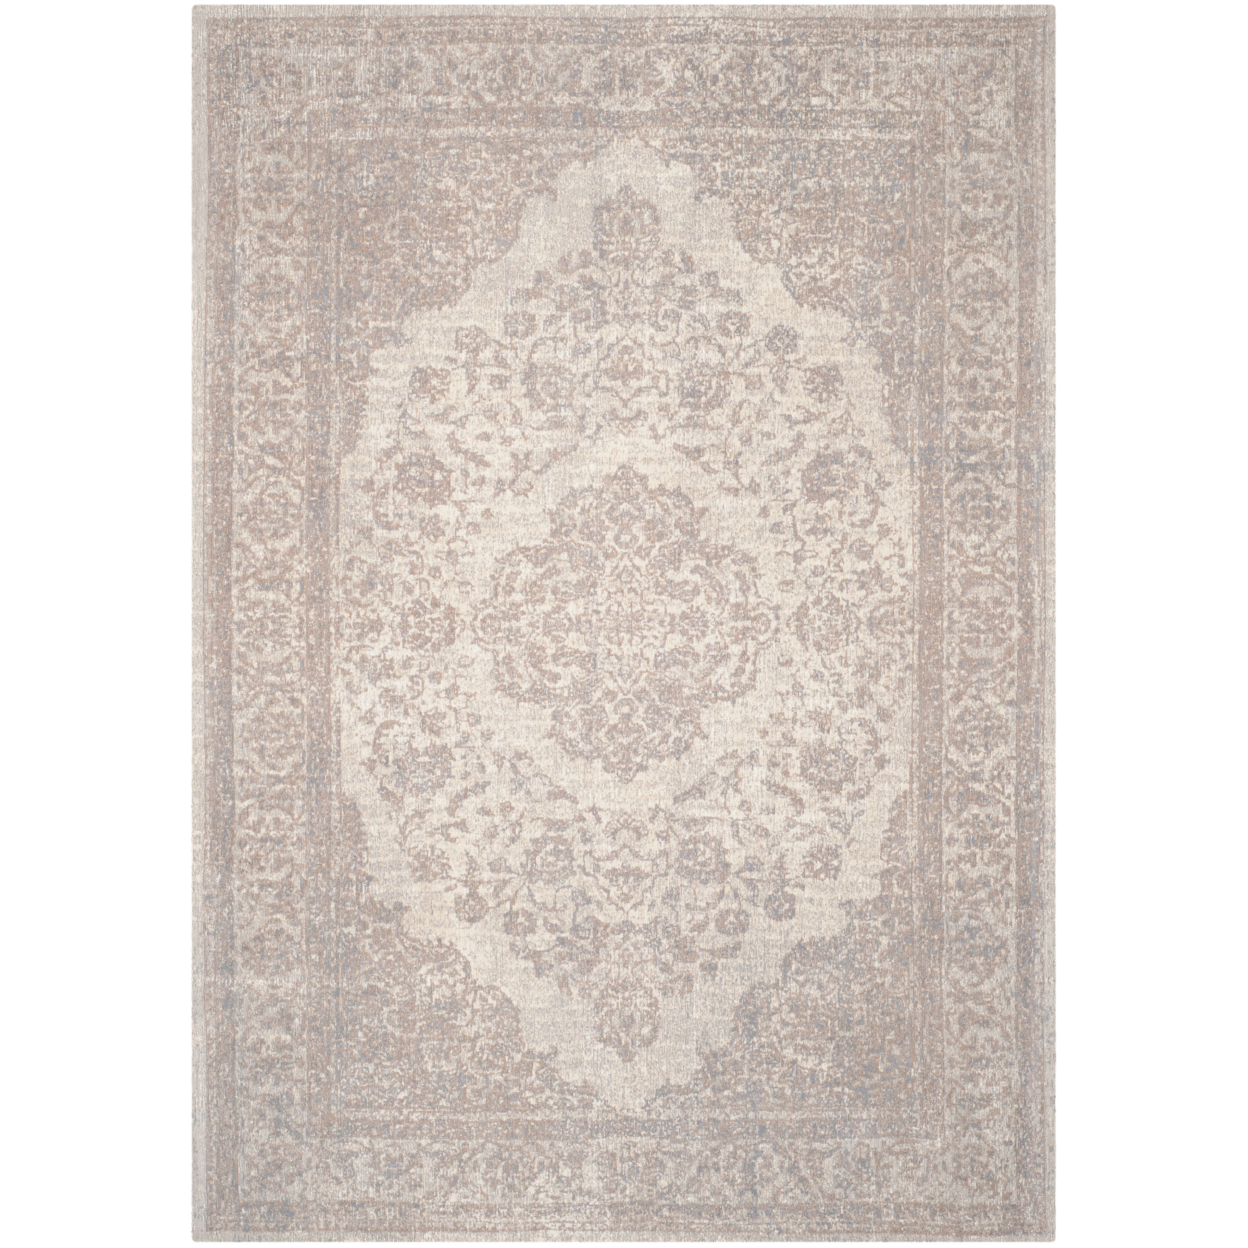 SAFAVIEH Classic Vintage Collection CLV121A Beige Rug - 9' X 12'